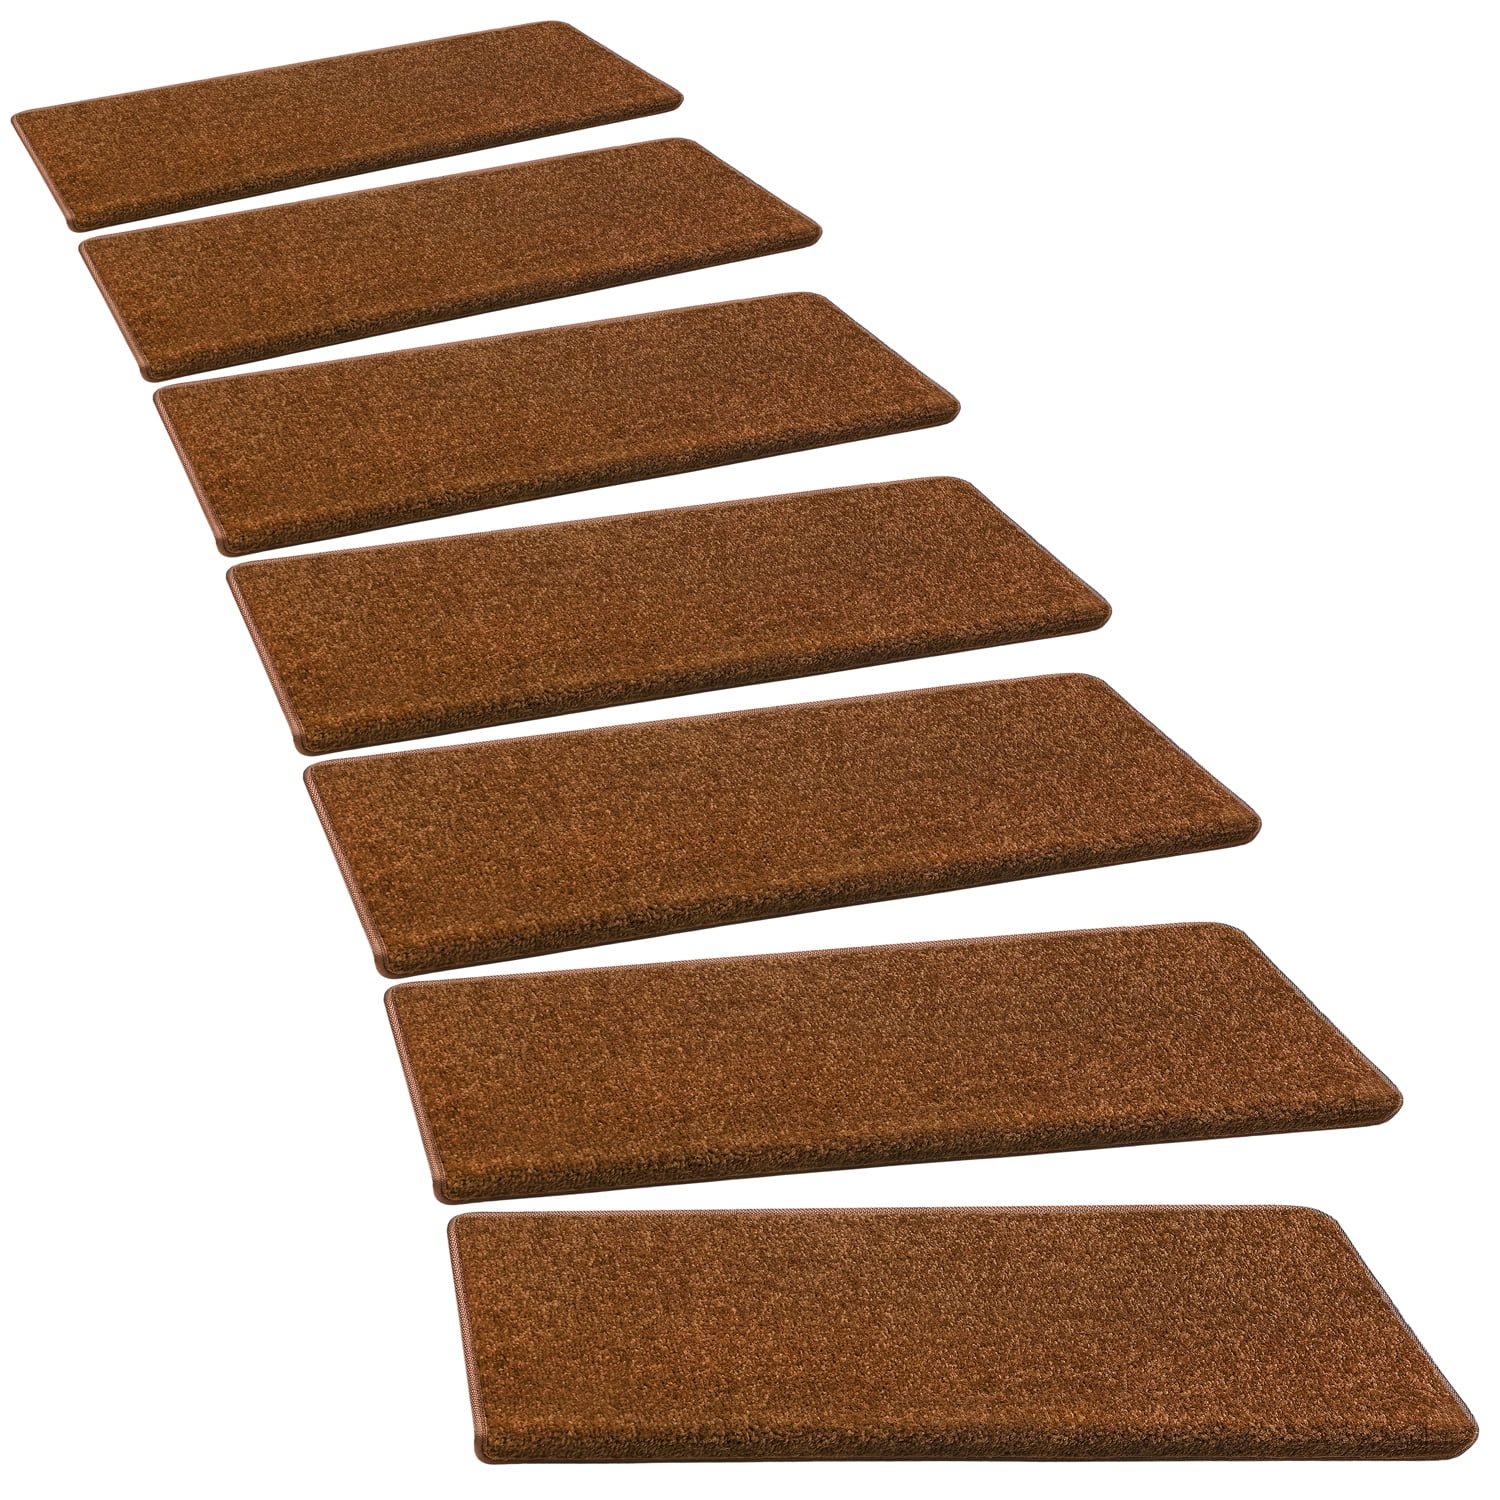 Carpet Stair Treads Non Slip Set of 7 Step Safety Pads For Hardwood Stairs NEW 